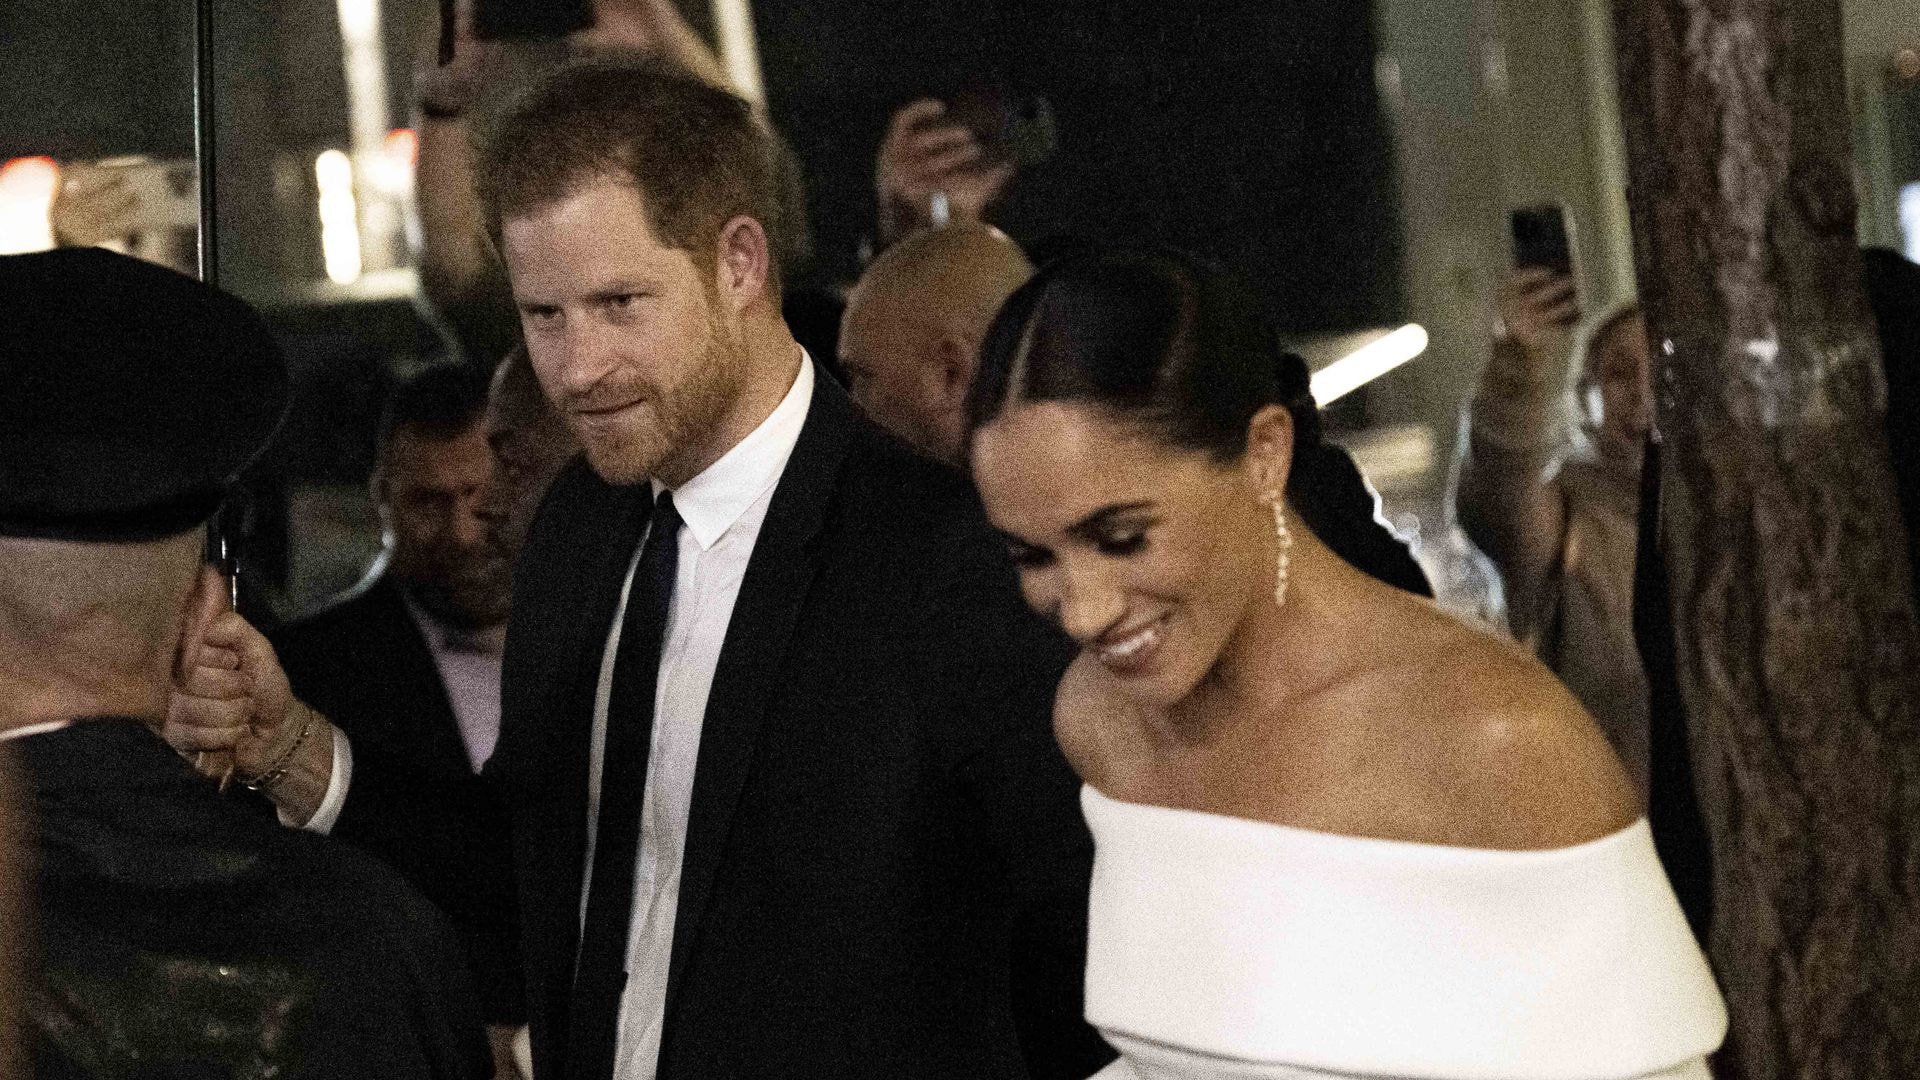 Prince Harry and Meghan Markle at the Ripple of Hope Award Gala in Nev York